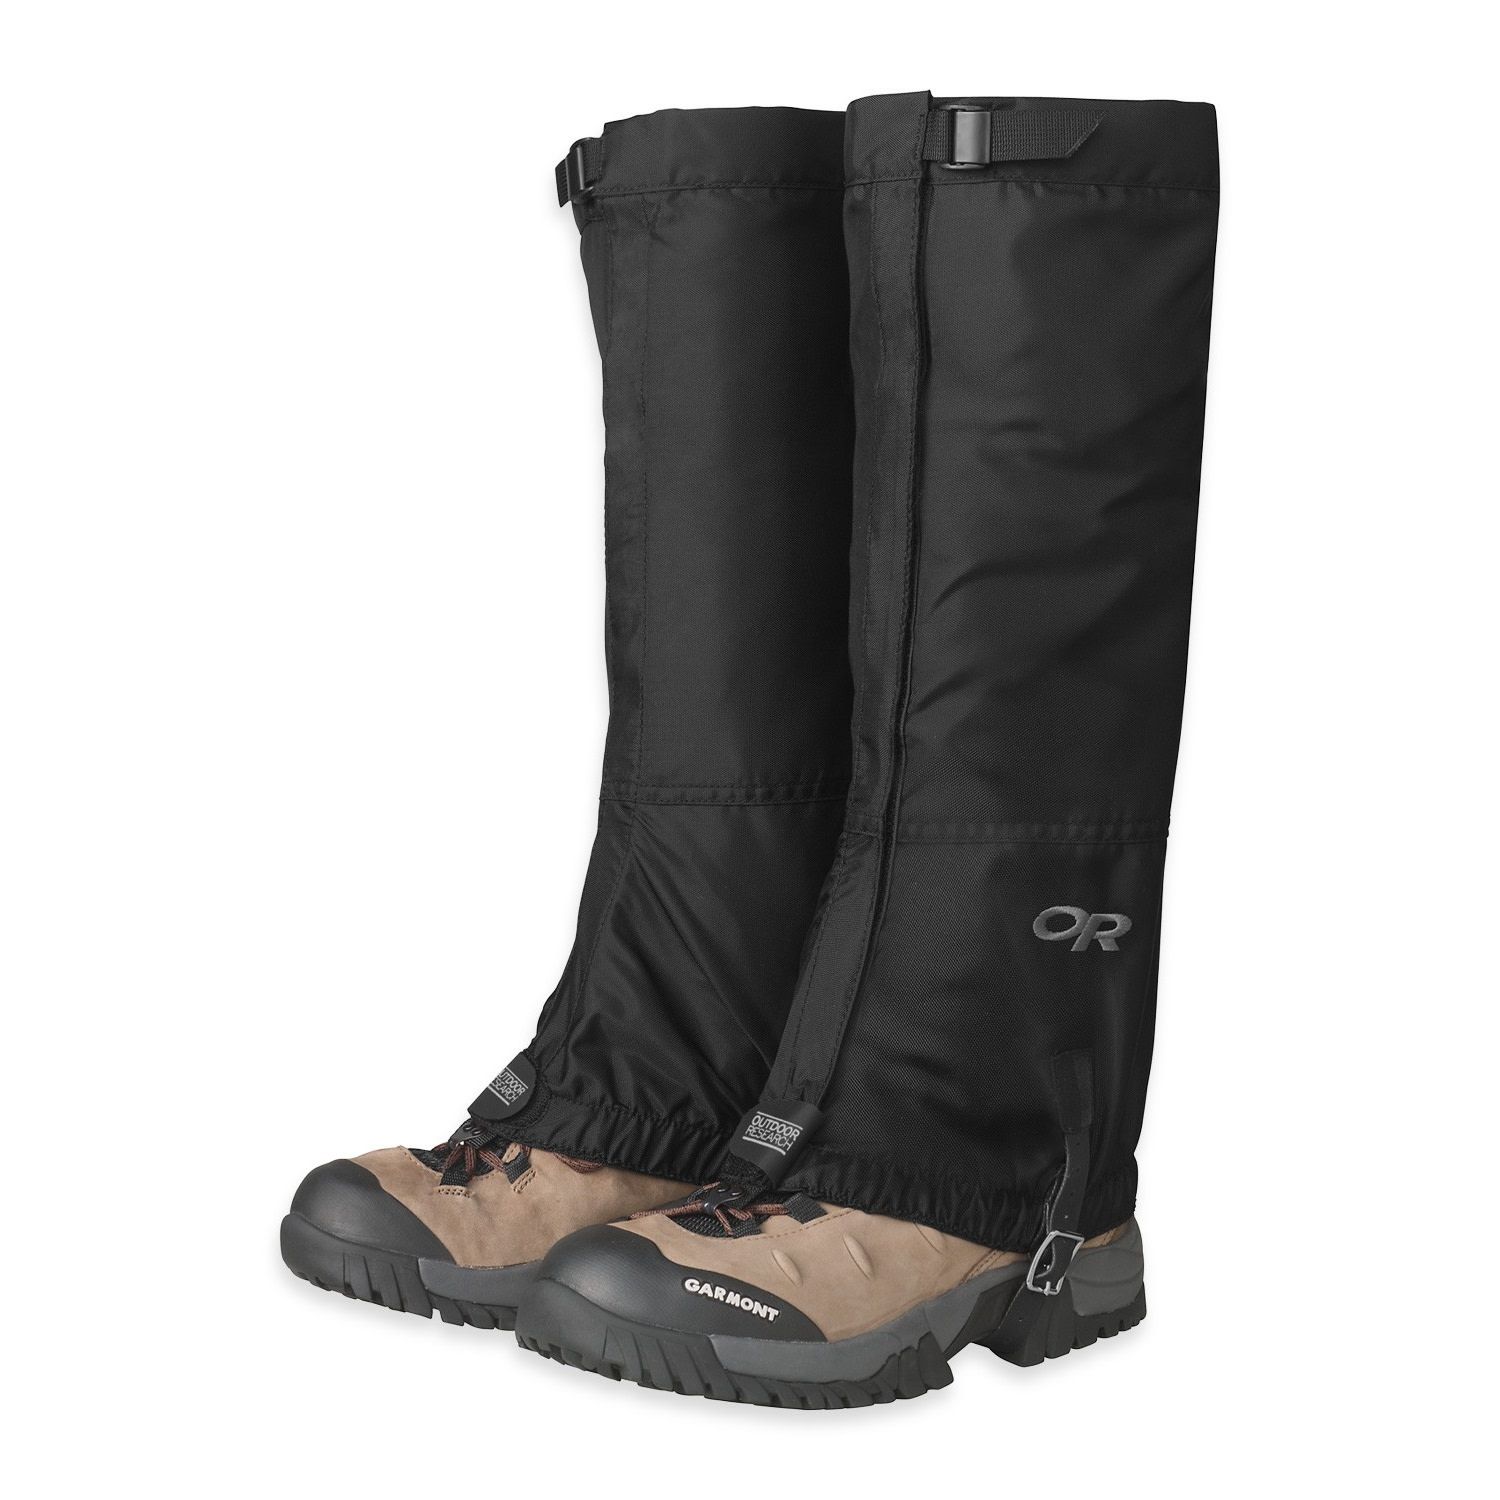 Outdoor Research Men's Rocky Mountain High Gaiters Black